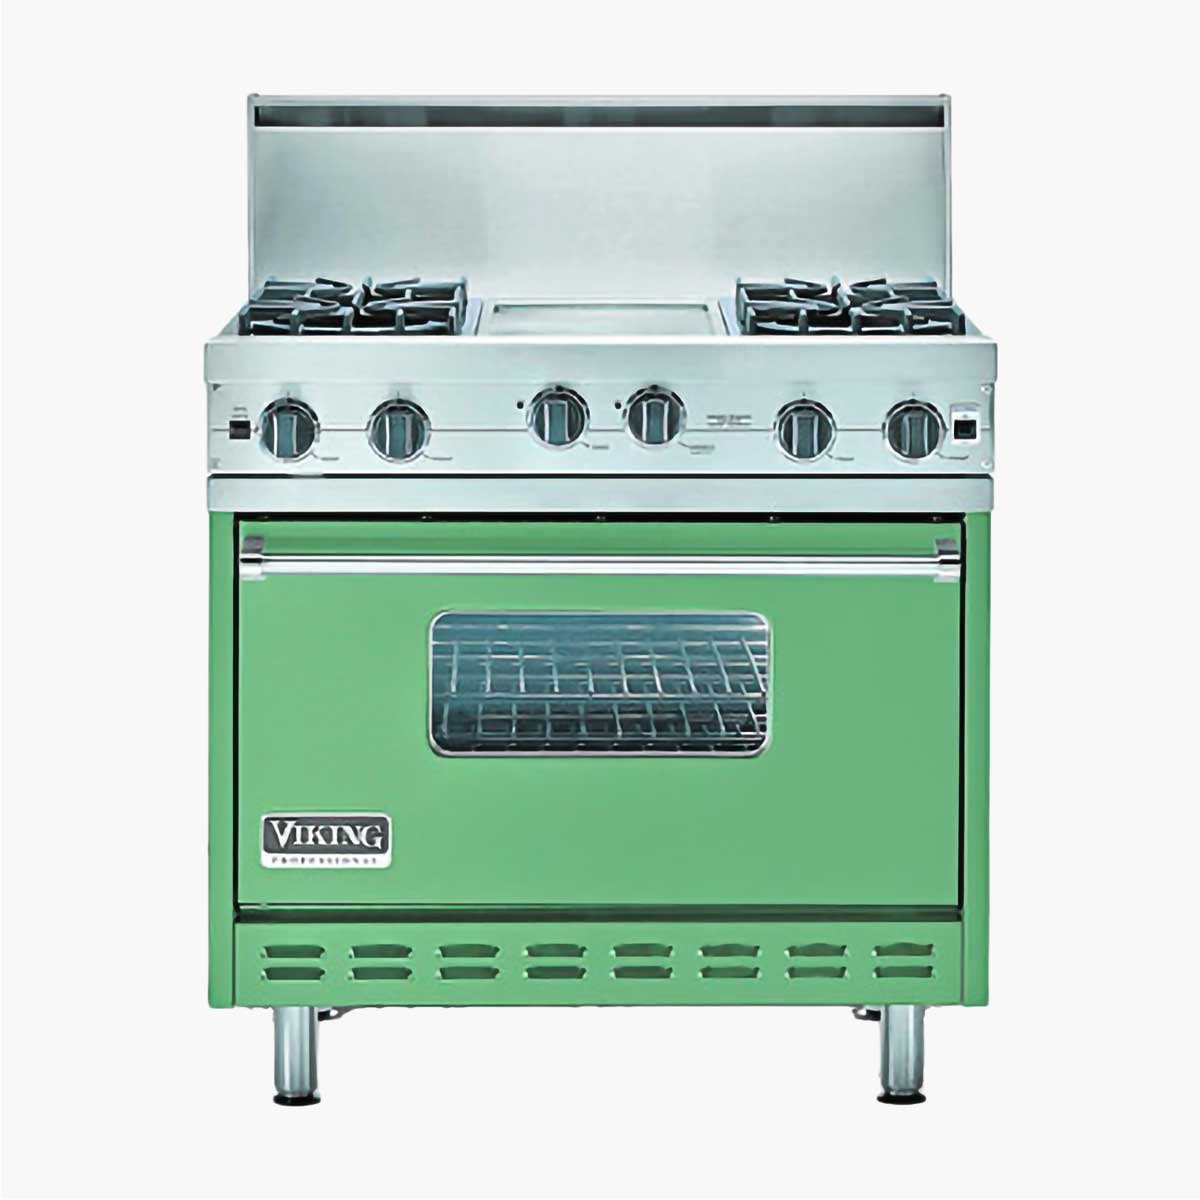 A green Viking oven, as part of Kate McDermott's favorite kitchen things.